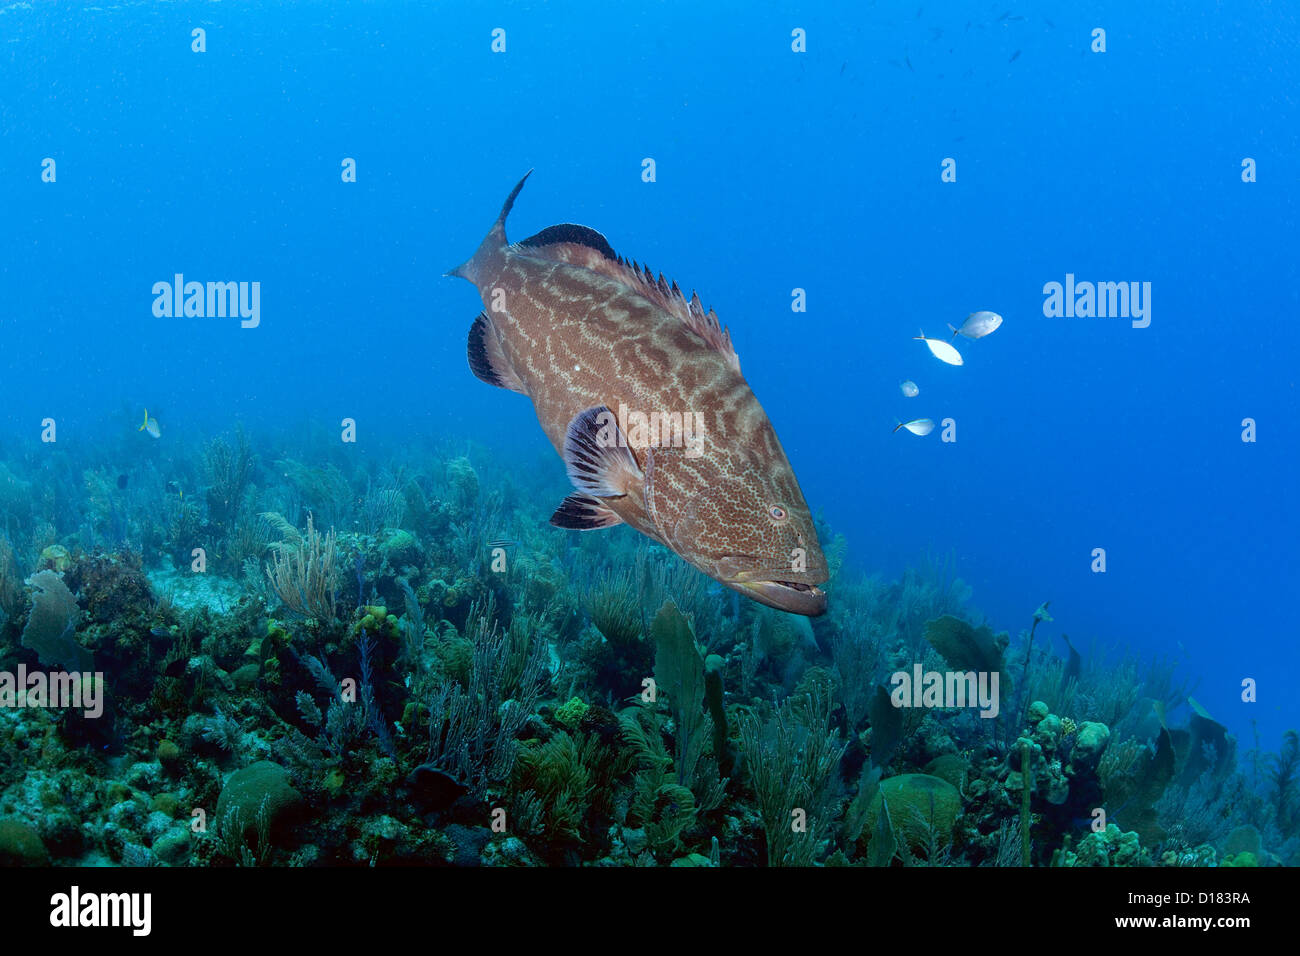 A grouper swims over a coral reef. Stock Photo